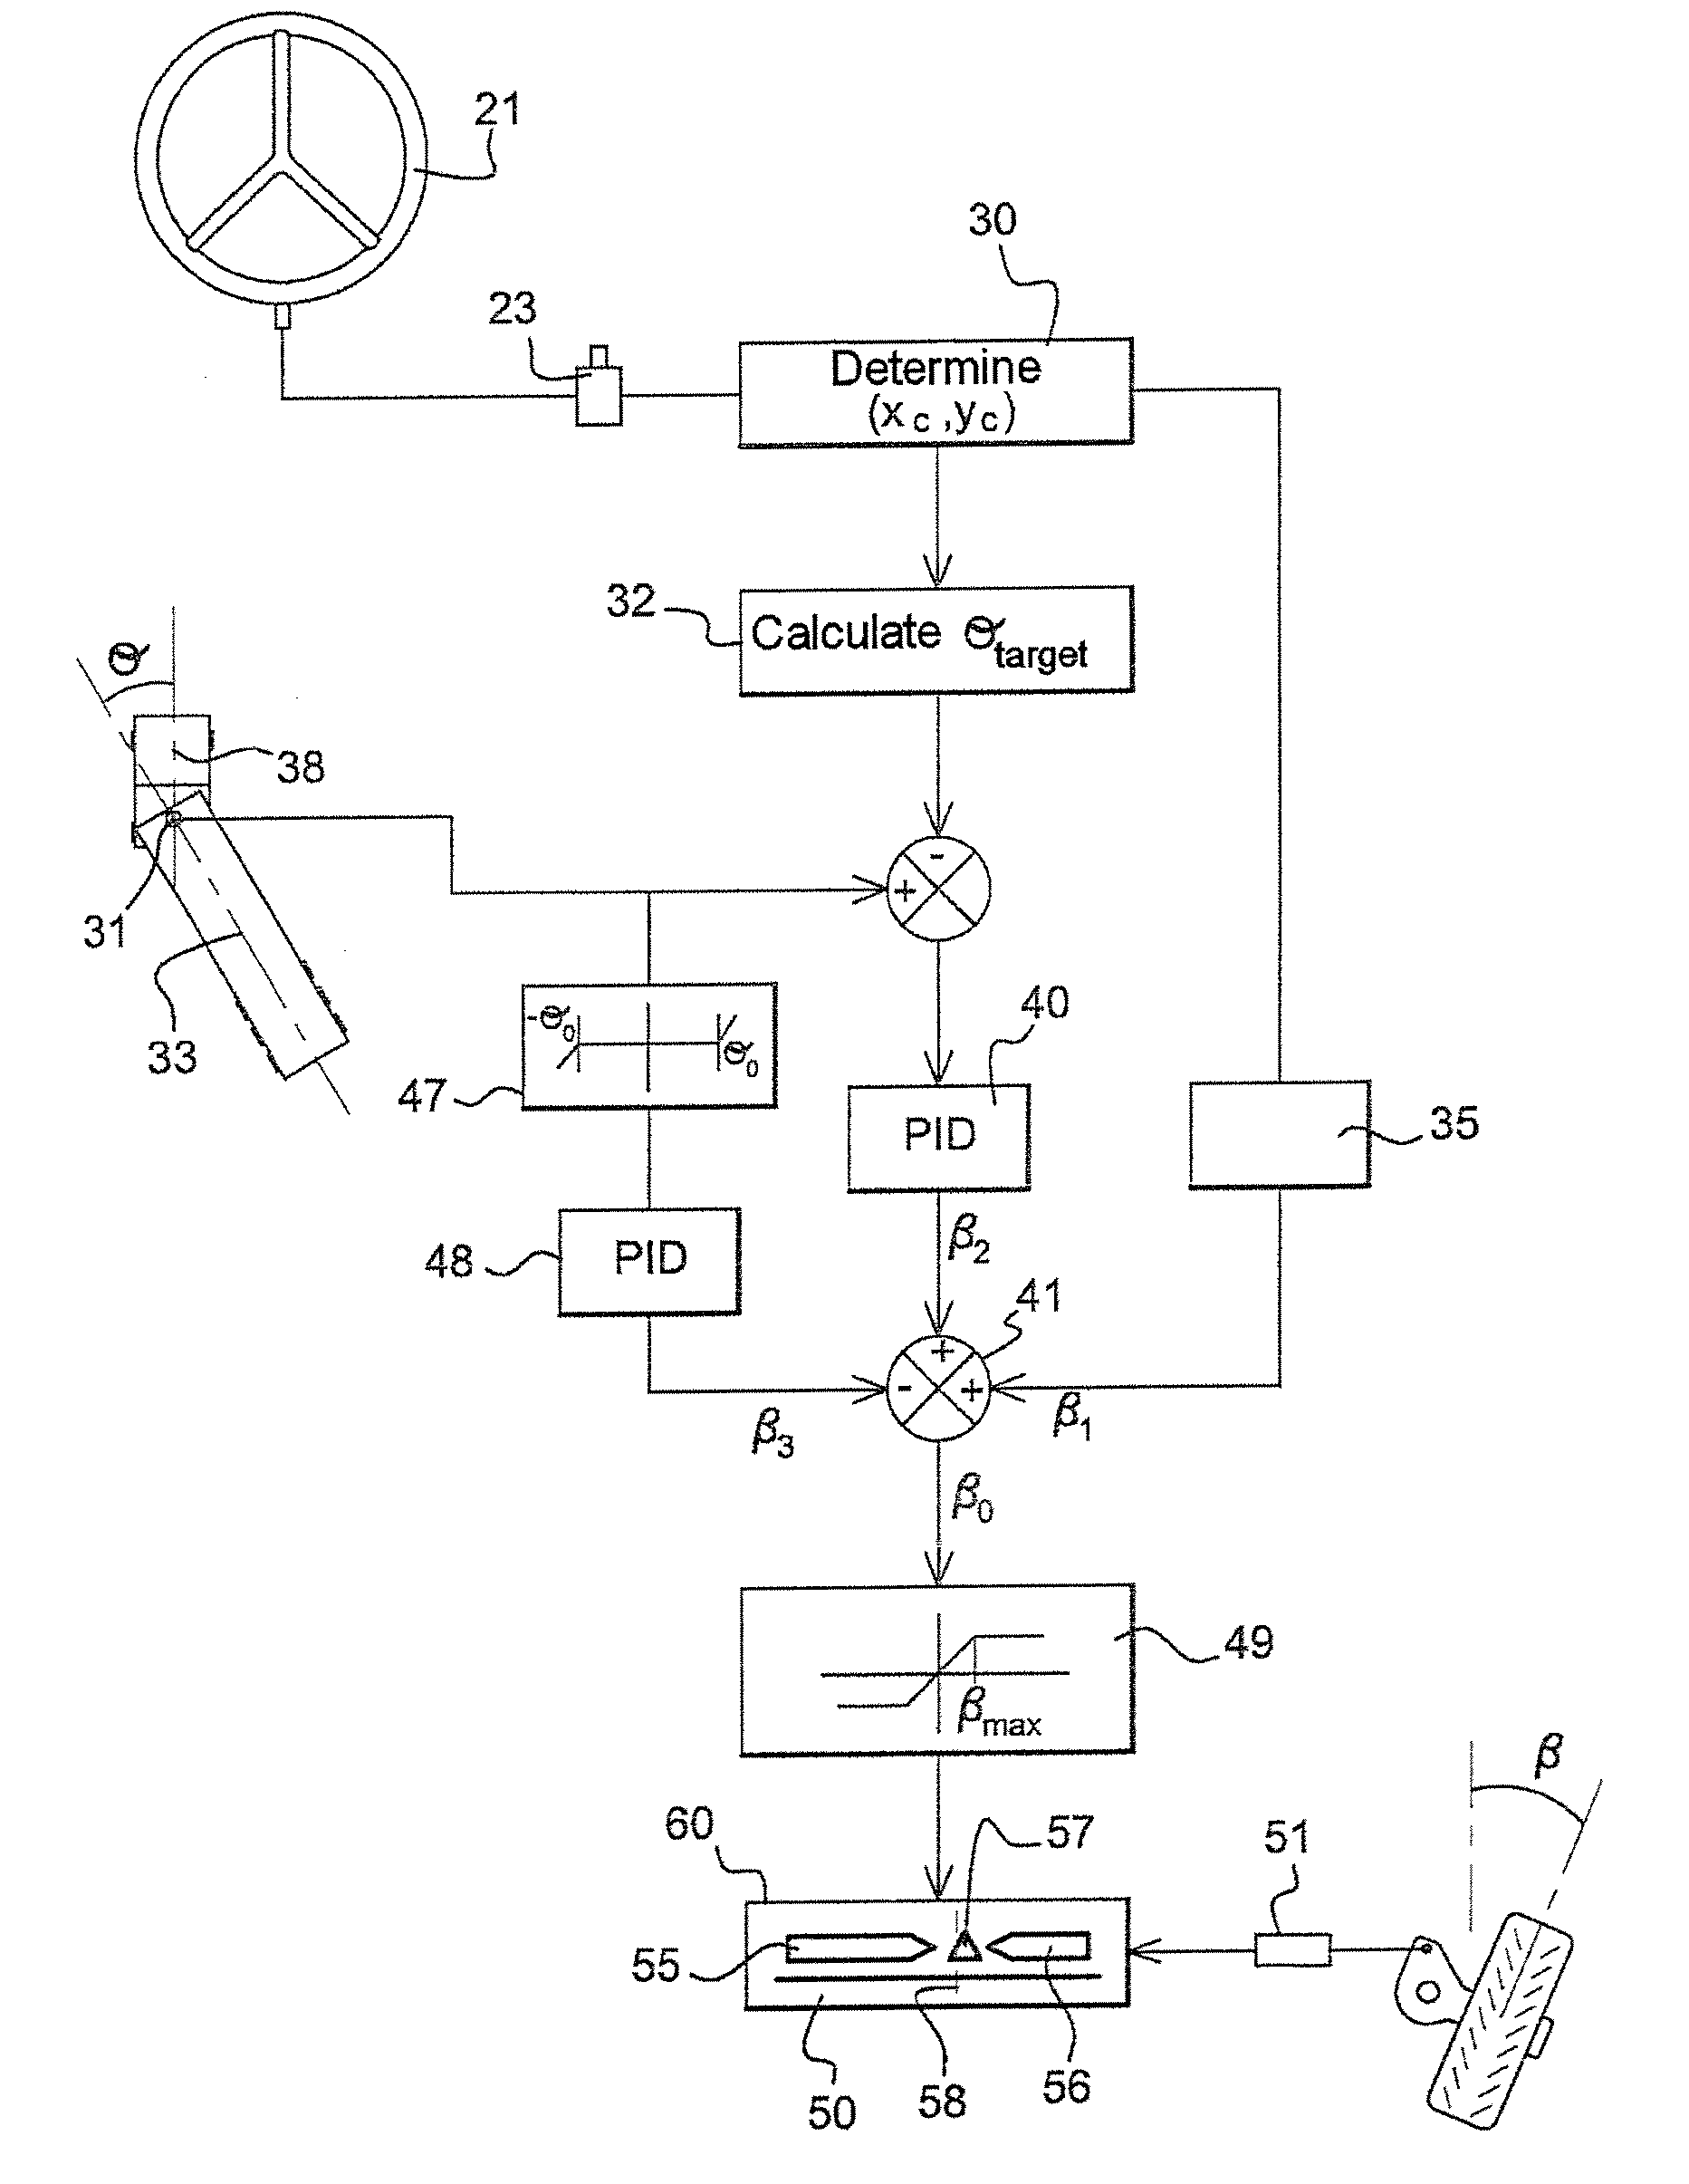 Drive assisting method for reversal path with drawn vehicle